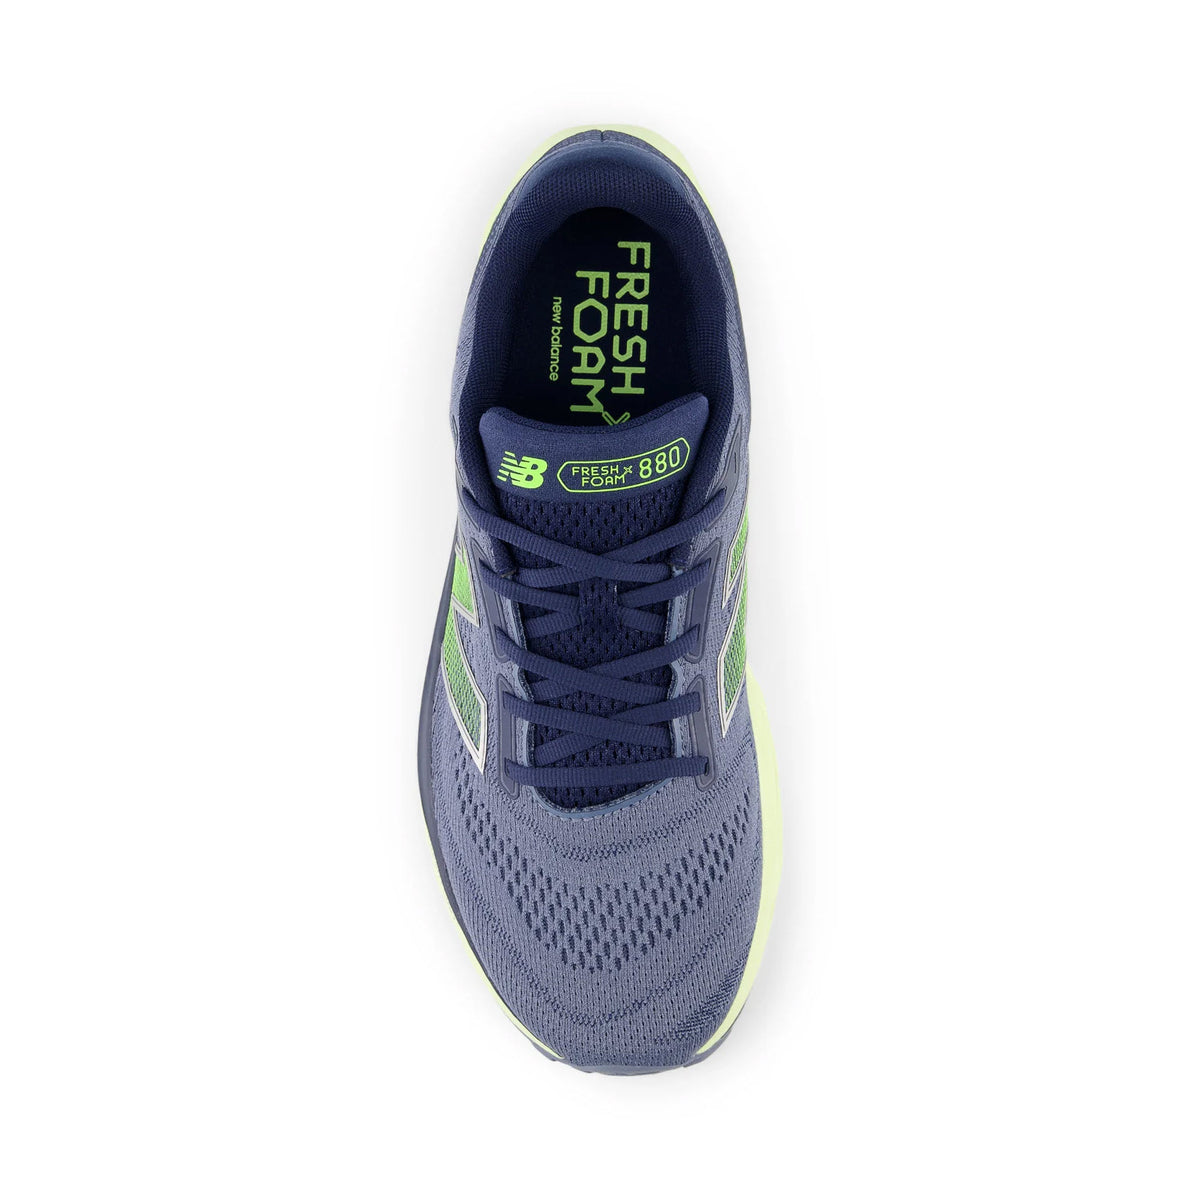 Top view of a single New Balance 880v14 Arctic Grey/Limelight/NB Navy - Mens running shoe in blue and green colors.